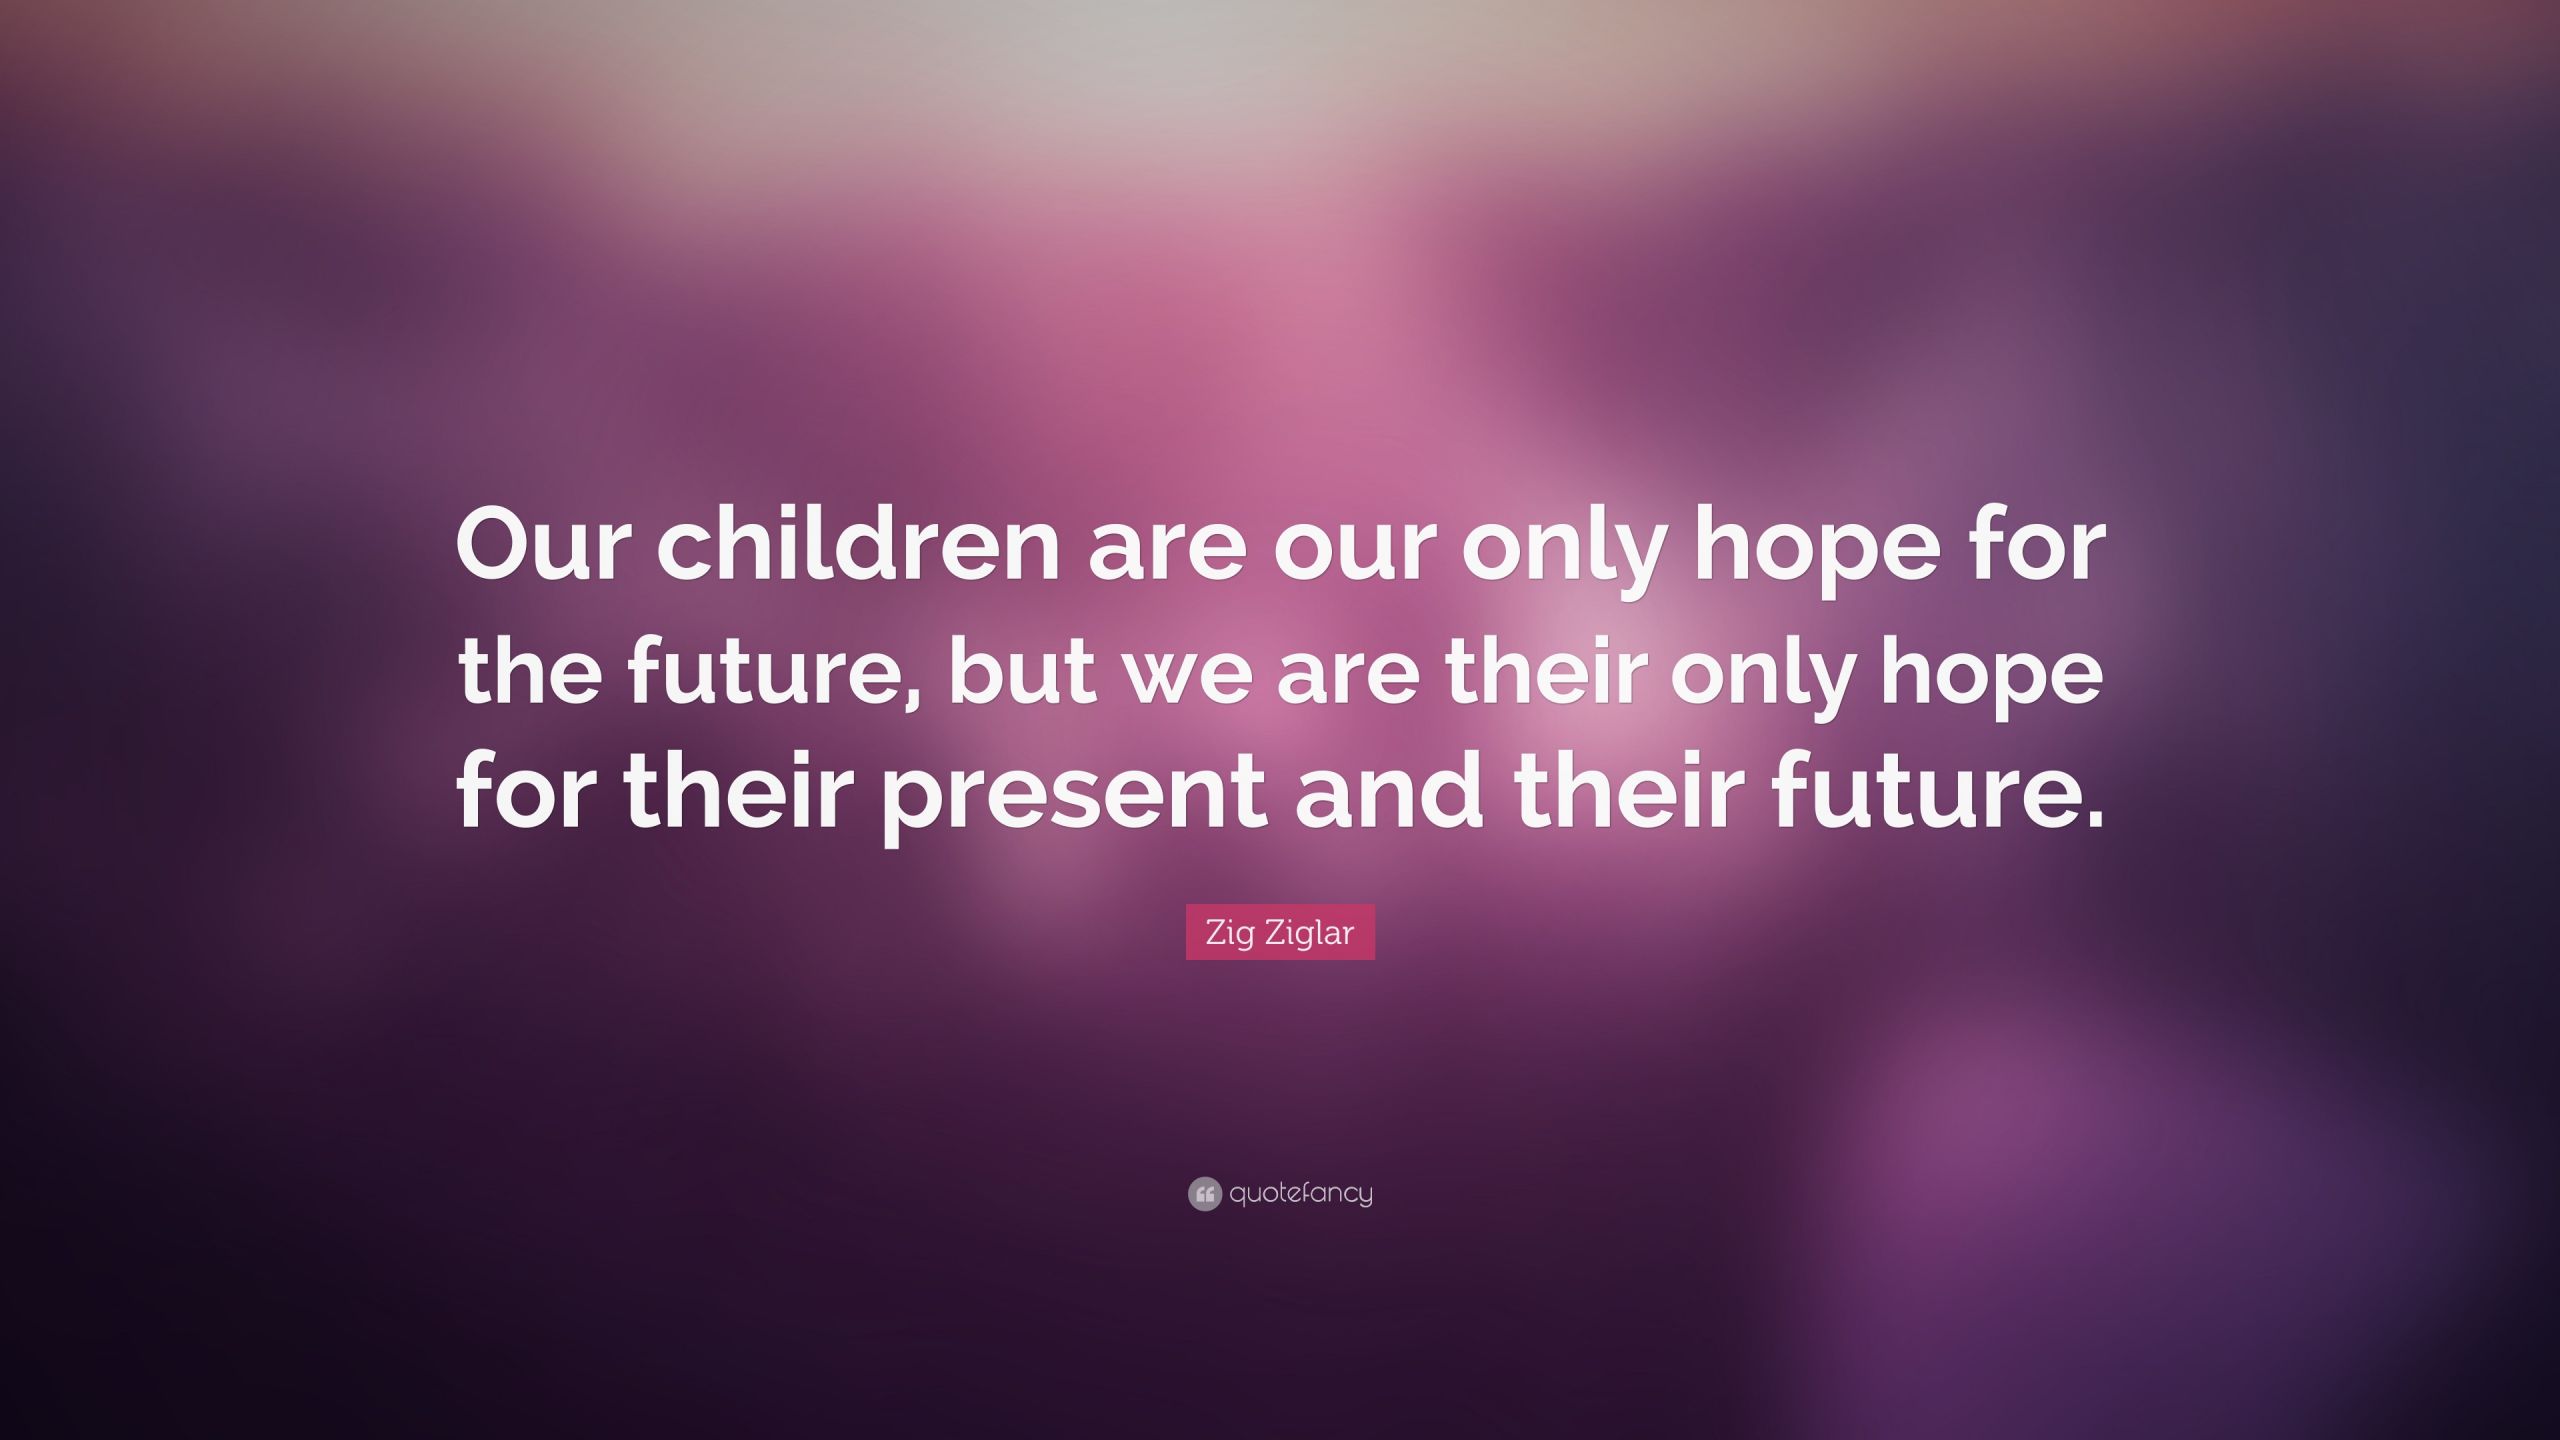 Kids Are The Future Quote
 Relationship Quotes 58 wallpapers Quotefancy